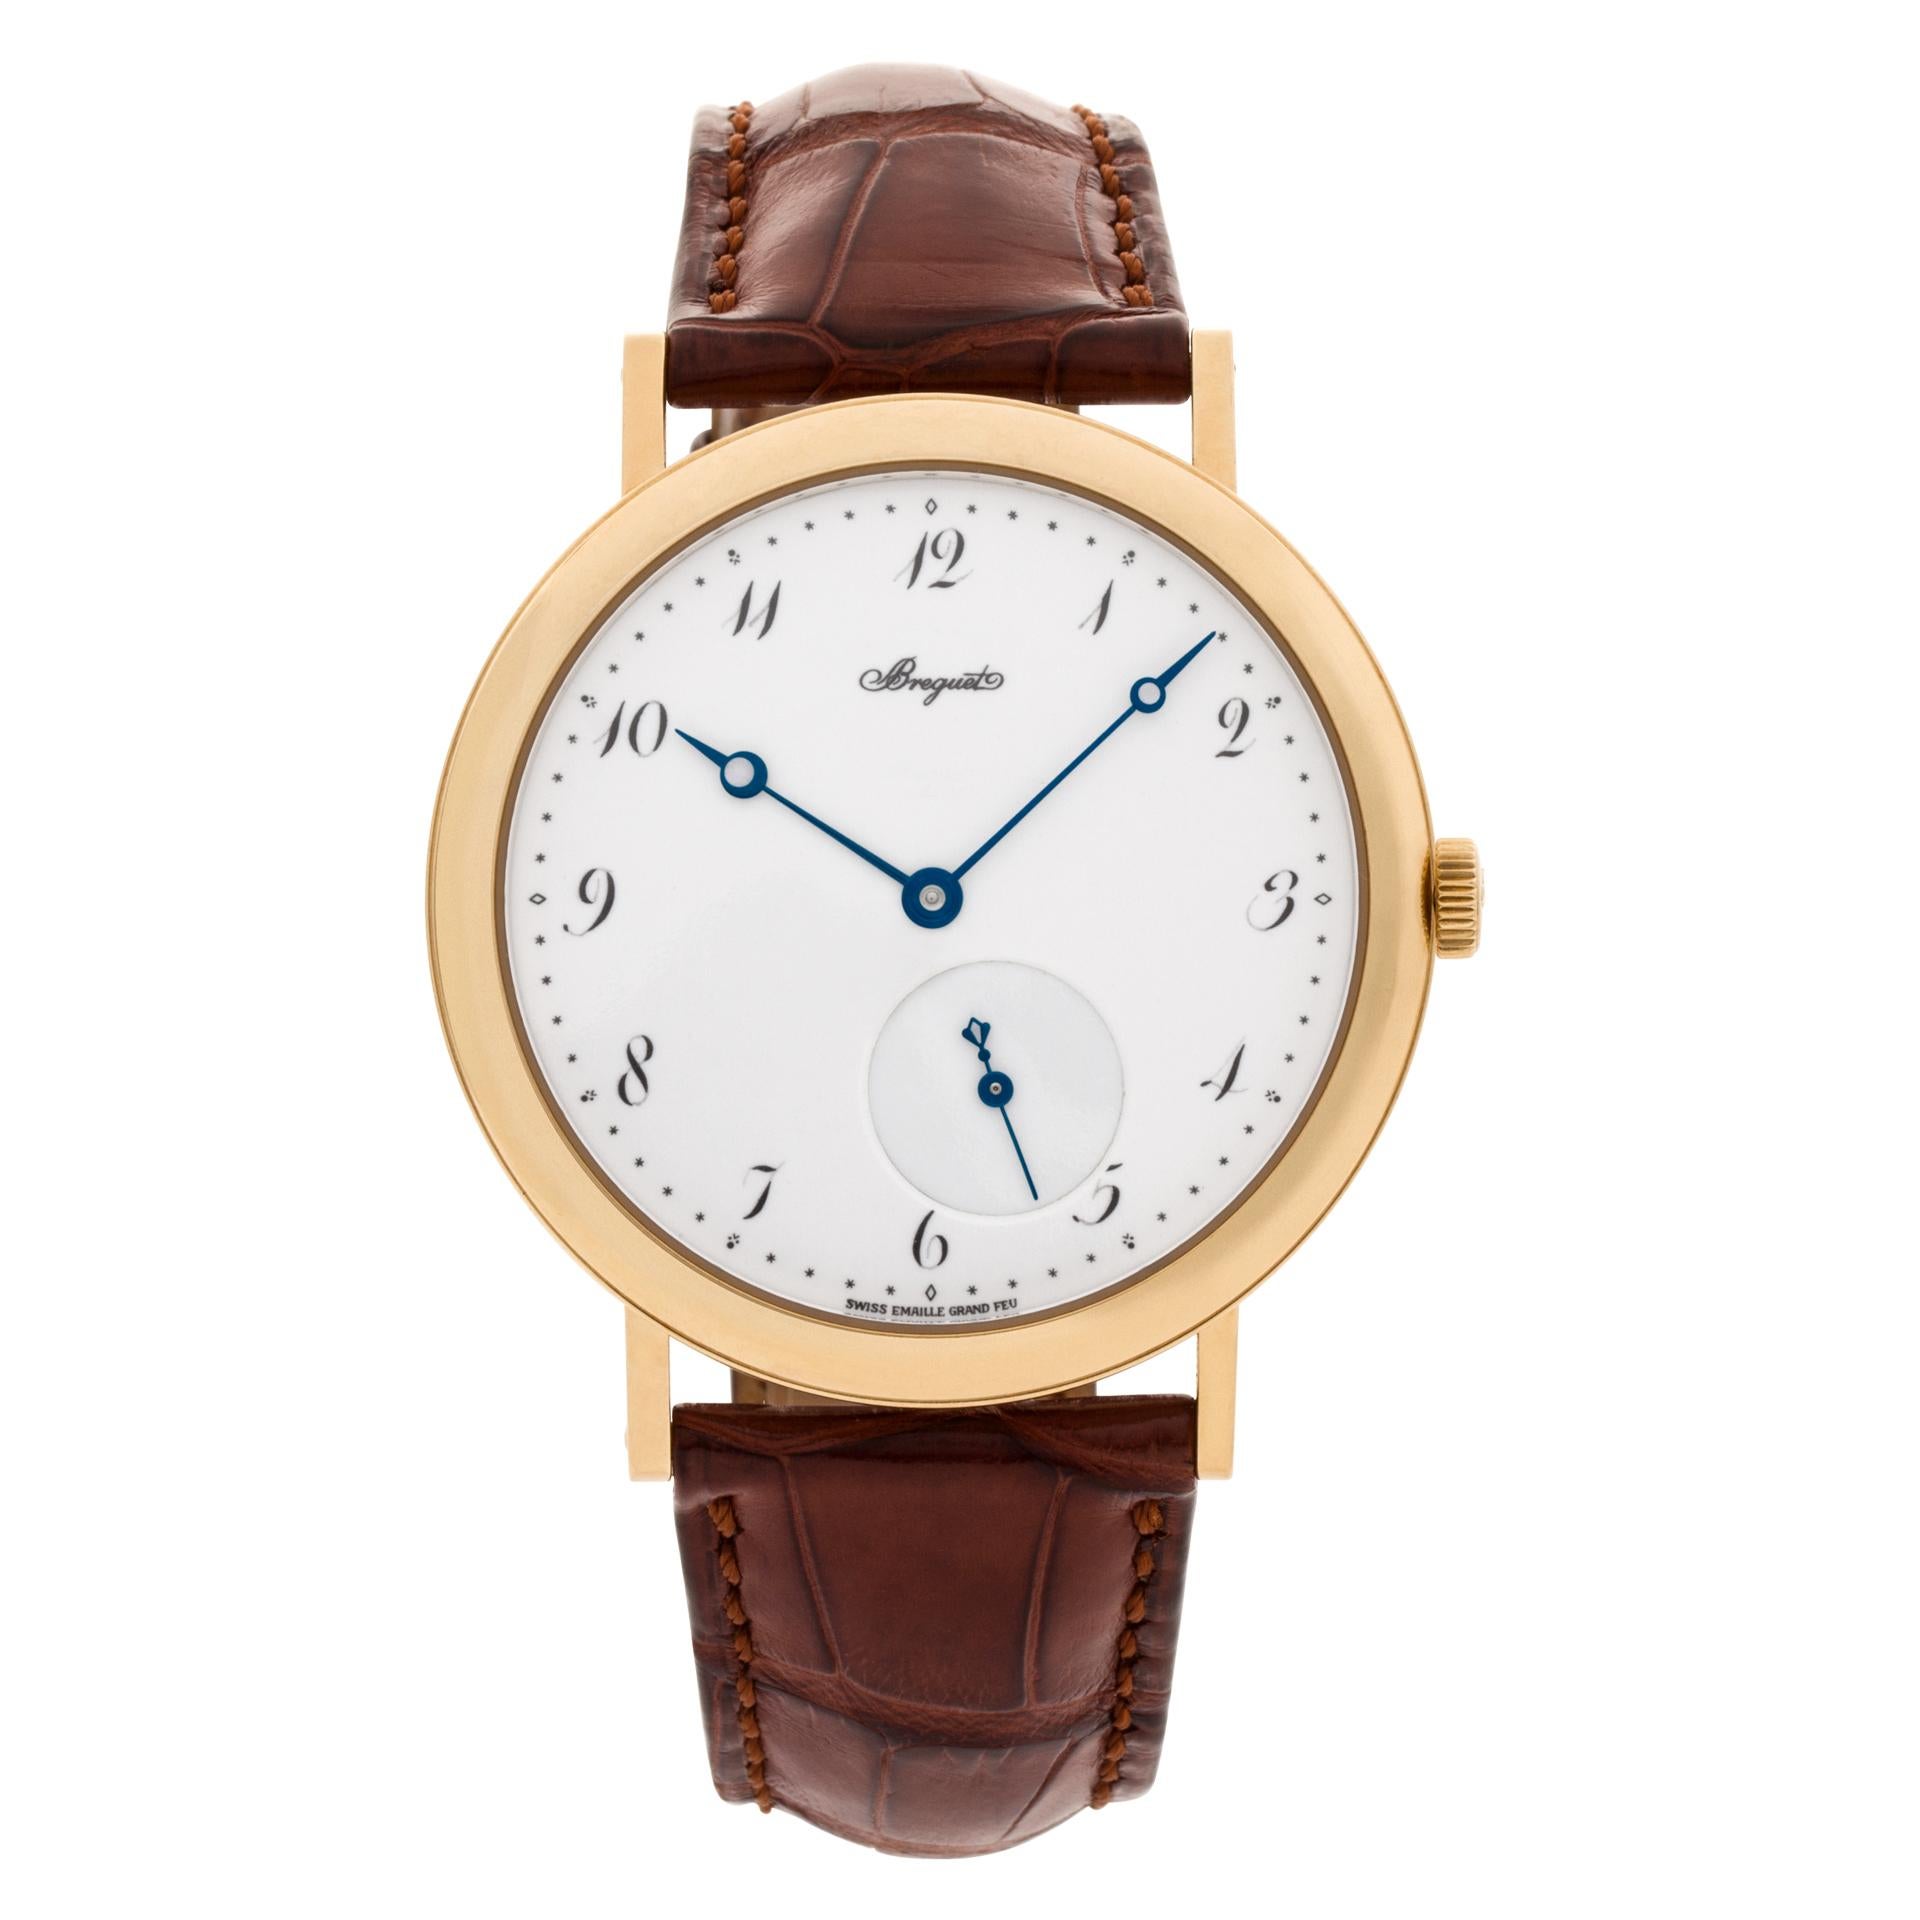 Breguet Classic 18k Yellow Gold and Leather Strap, Ref 5140 Auto Watch 1